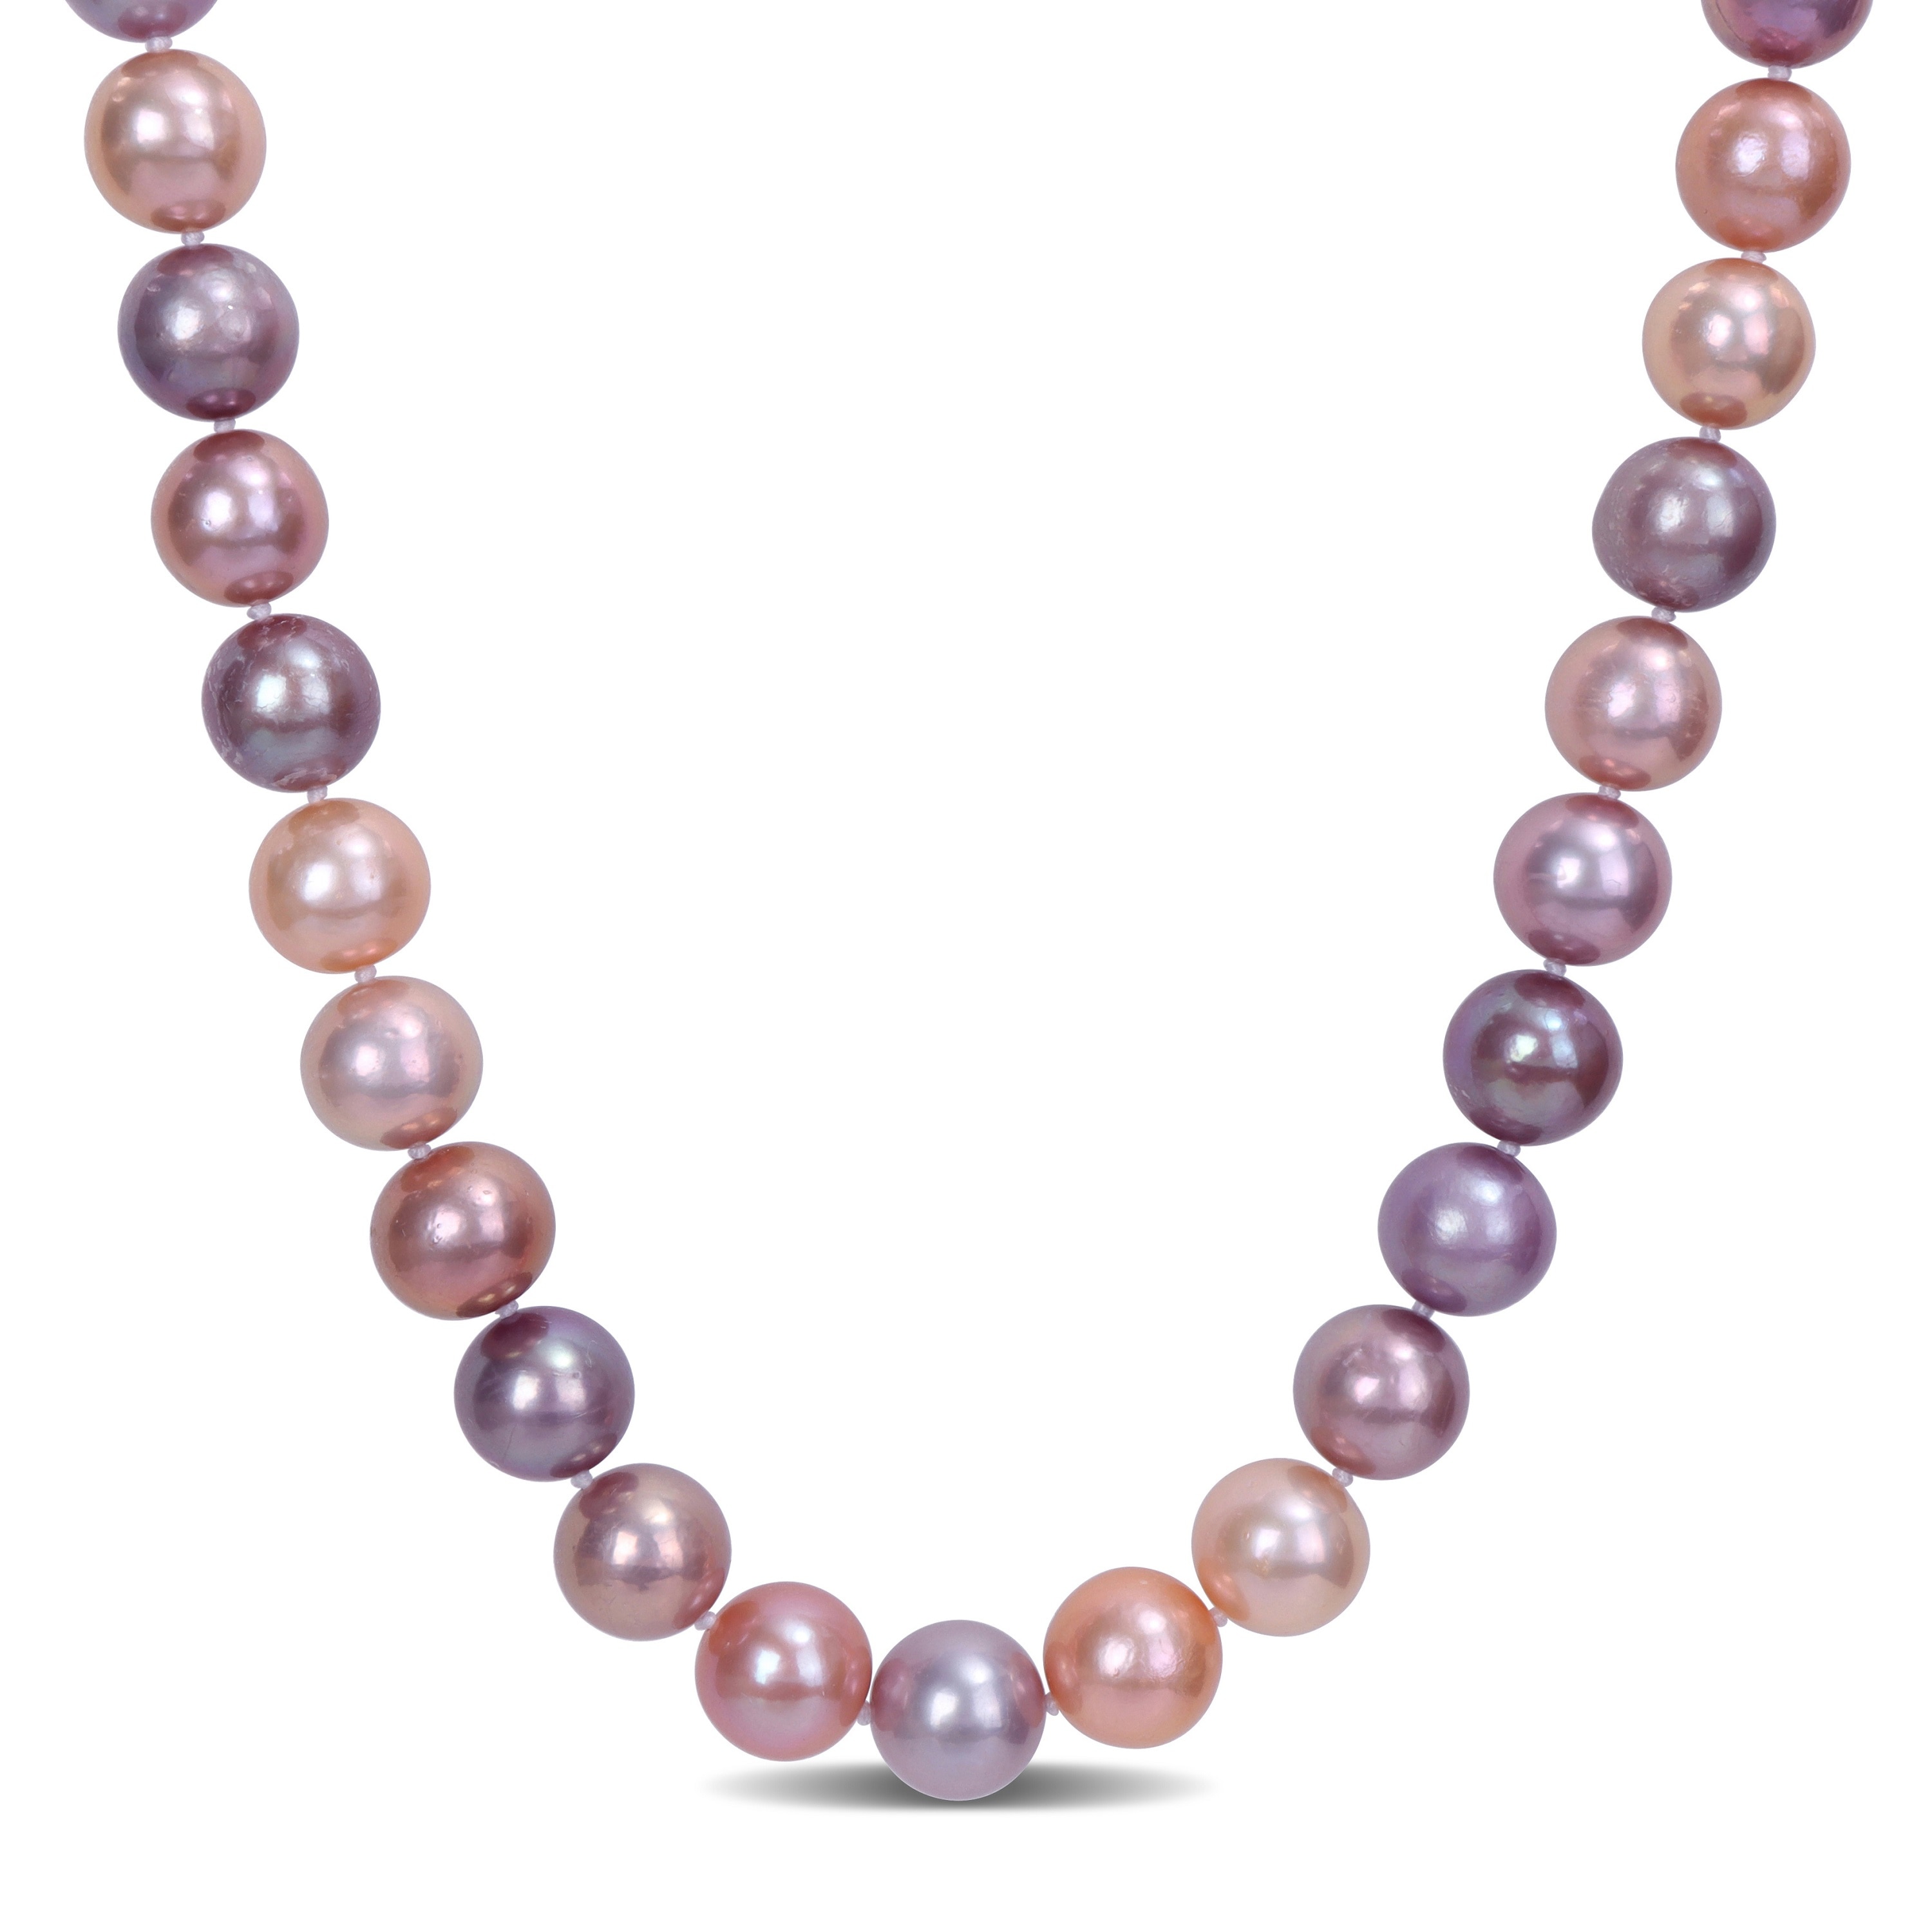 Jewellery - Necklaces & Pendants - Necklaces - Amour Pearls 9-10m